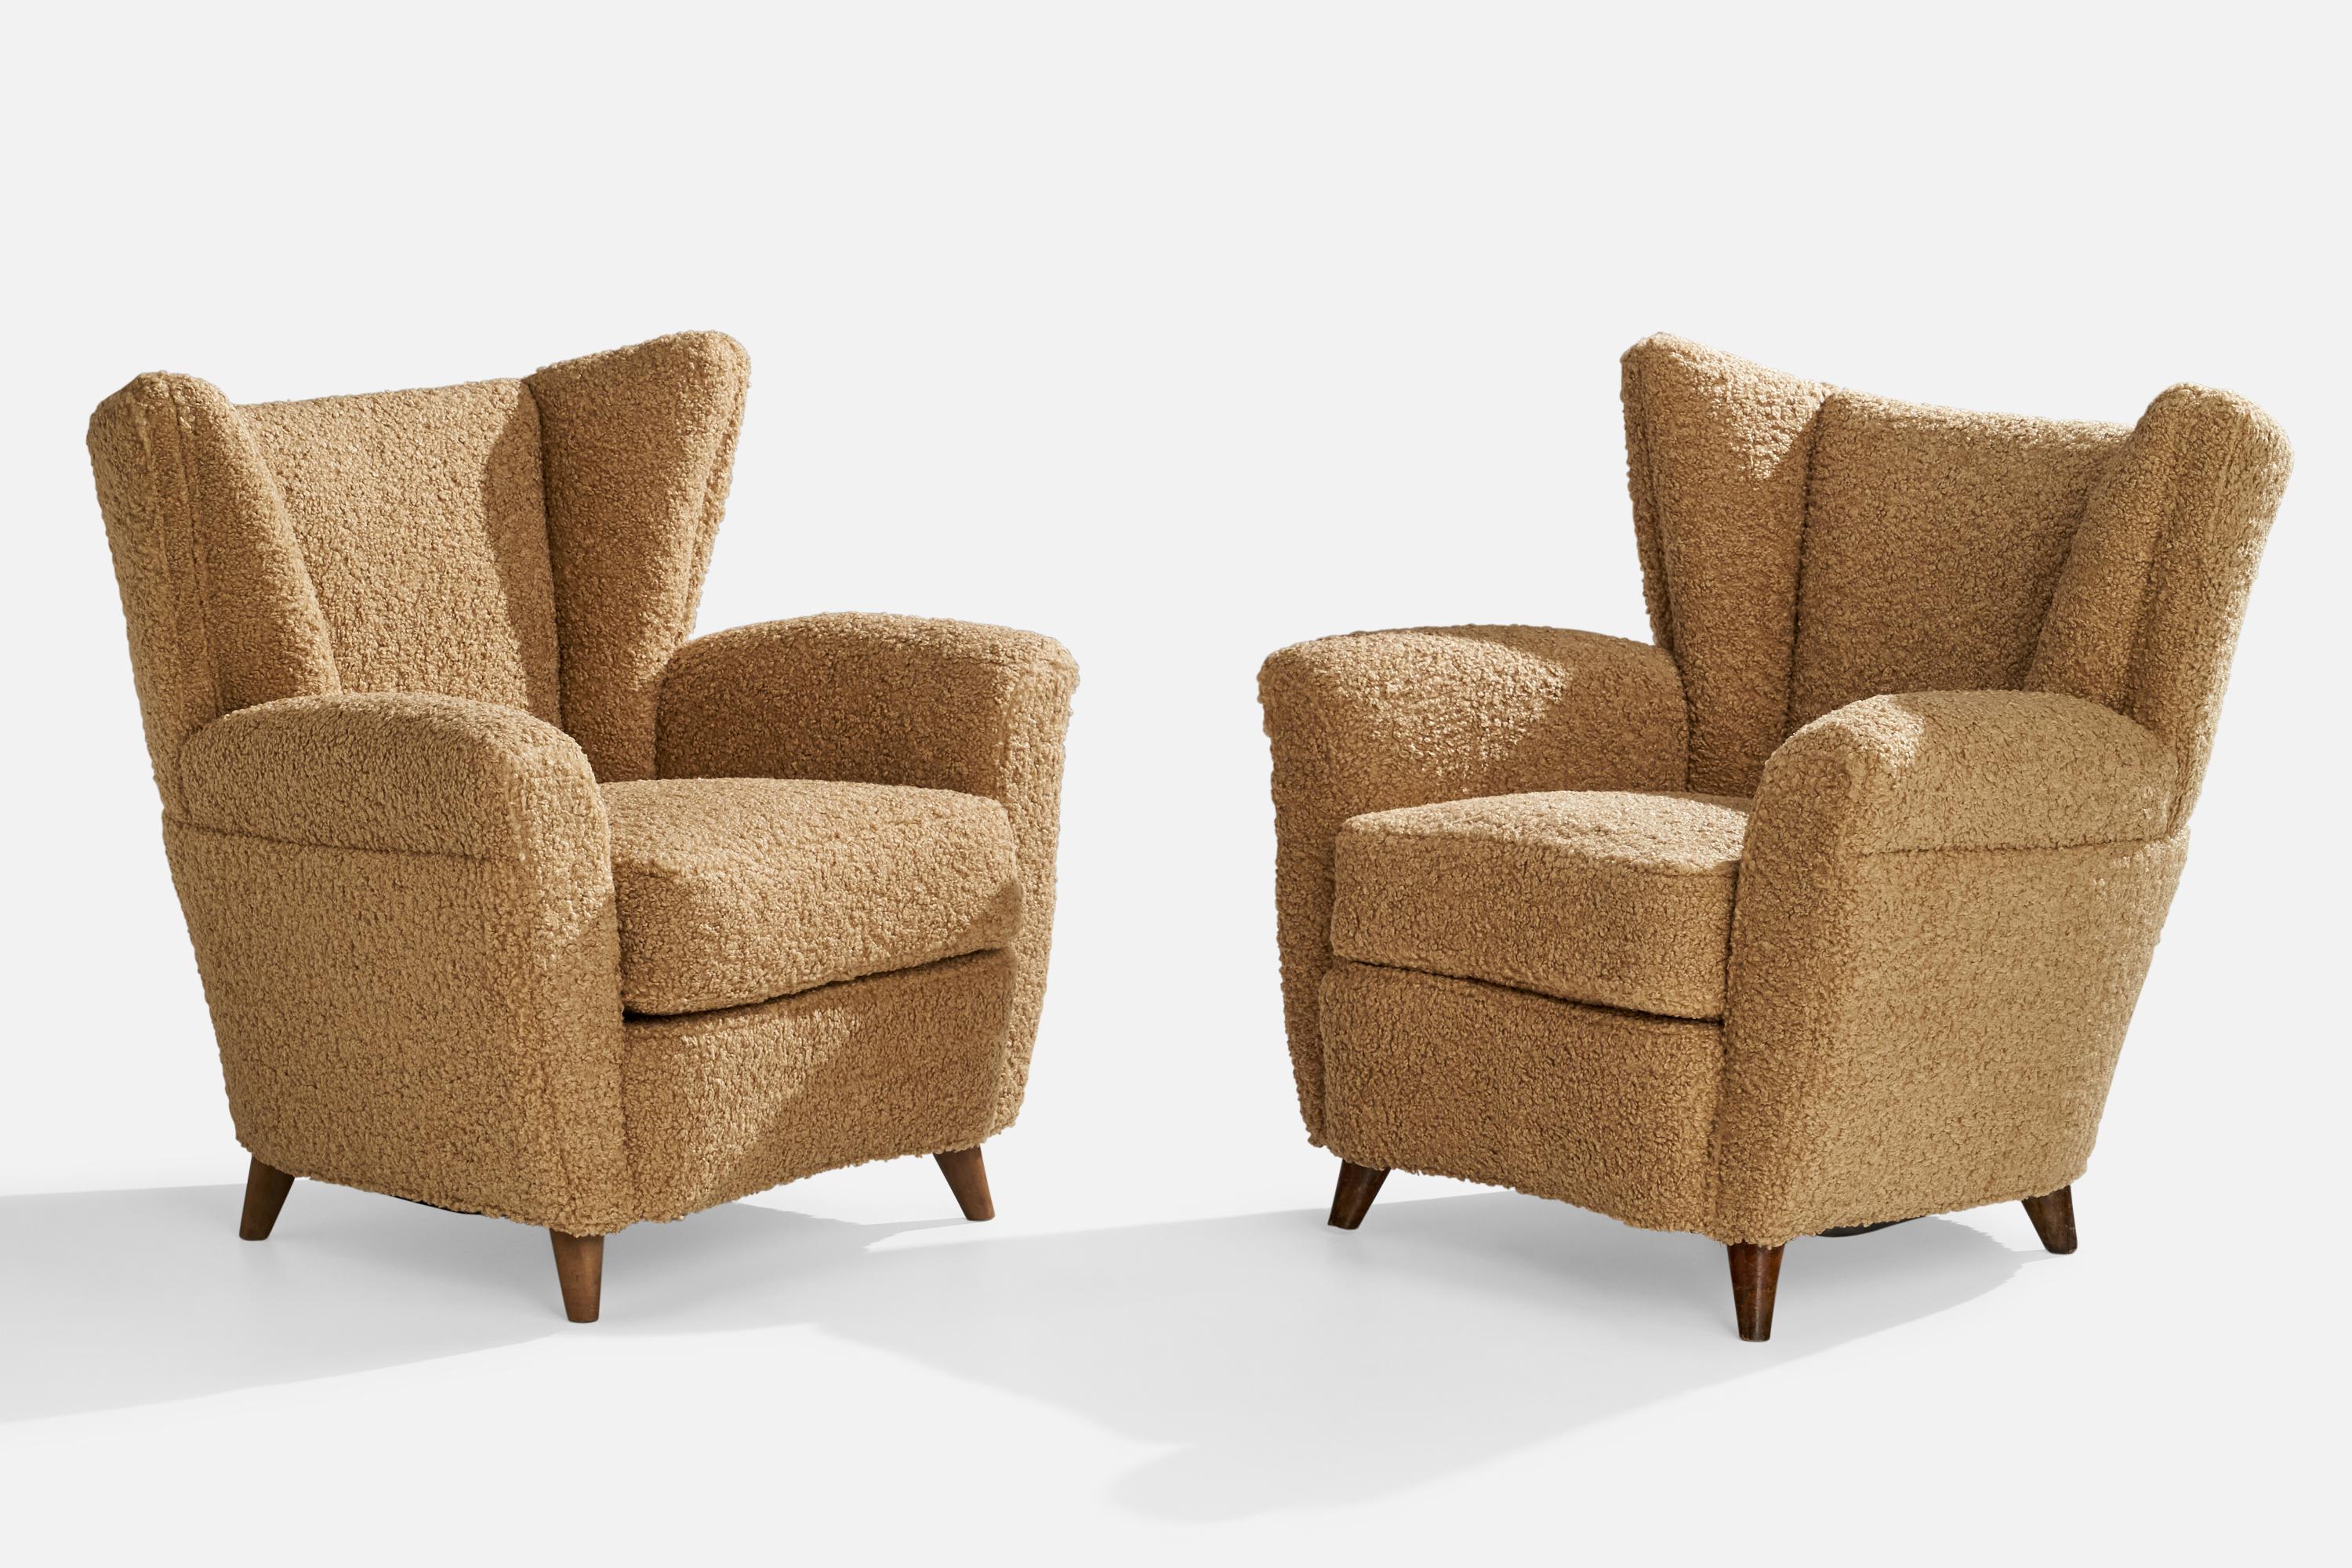 A pair of beige brown bouclé fabric and dark-stained wood lounge chairs designed and produced in Italy, 1940s.

Seat height 17.5”.